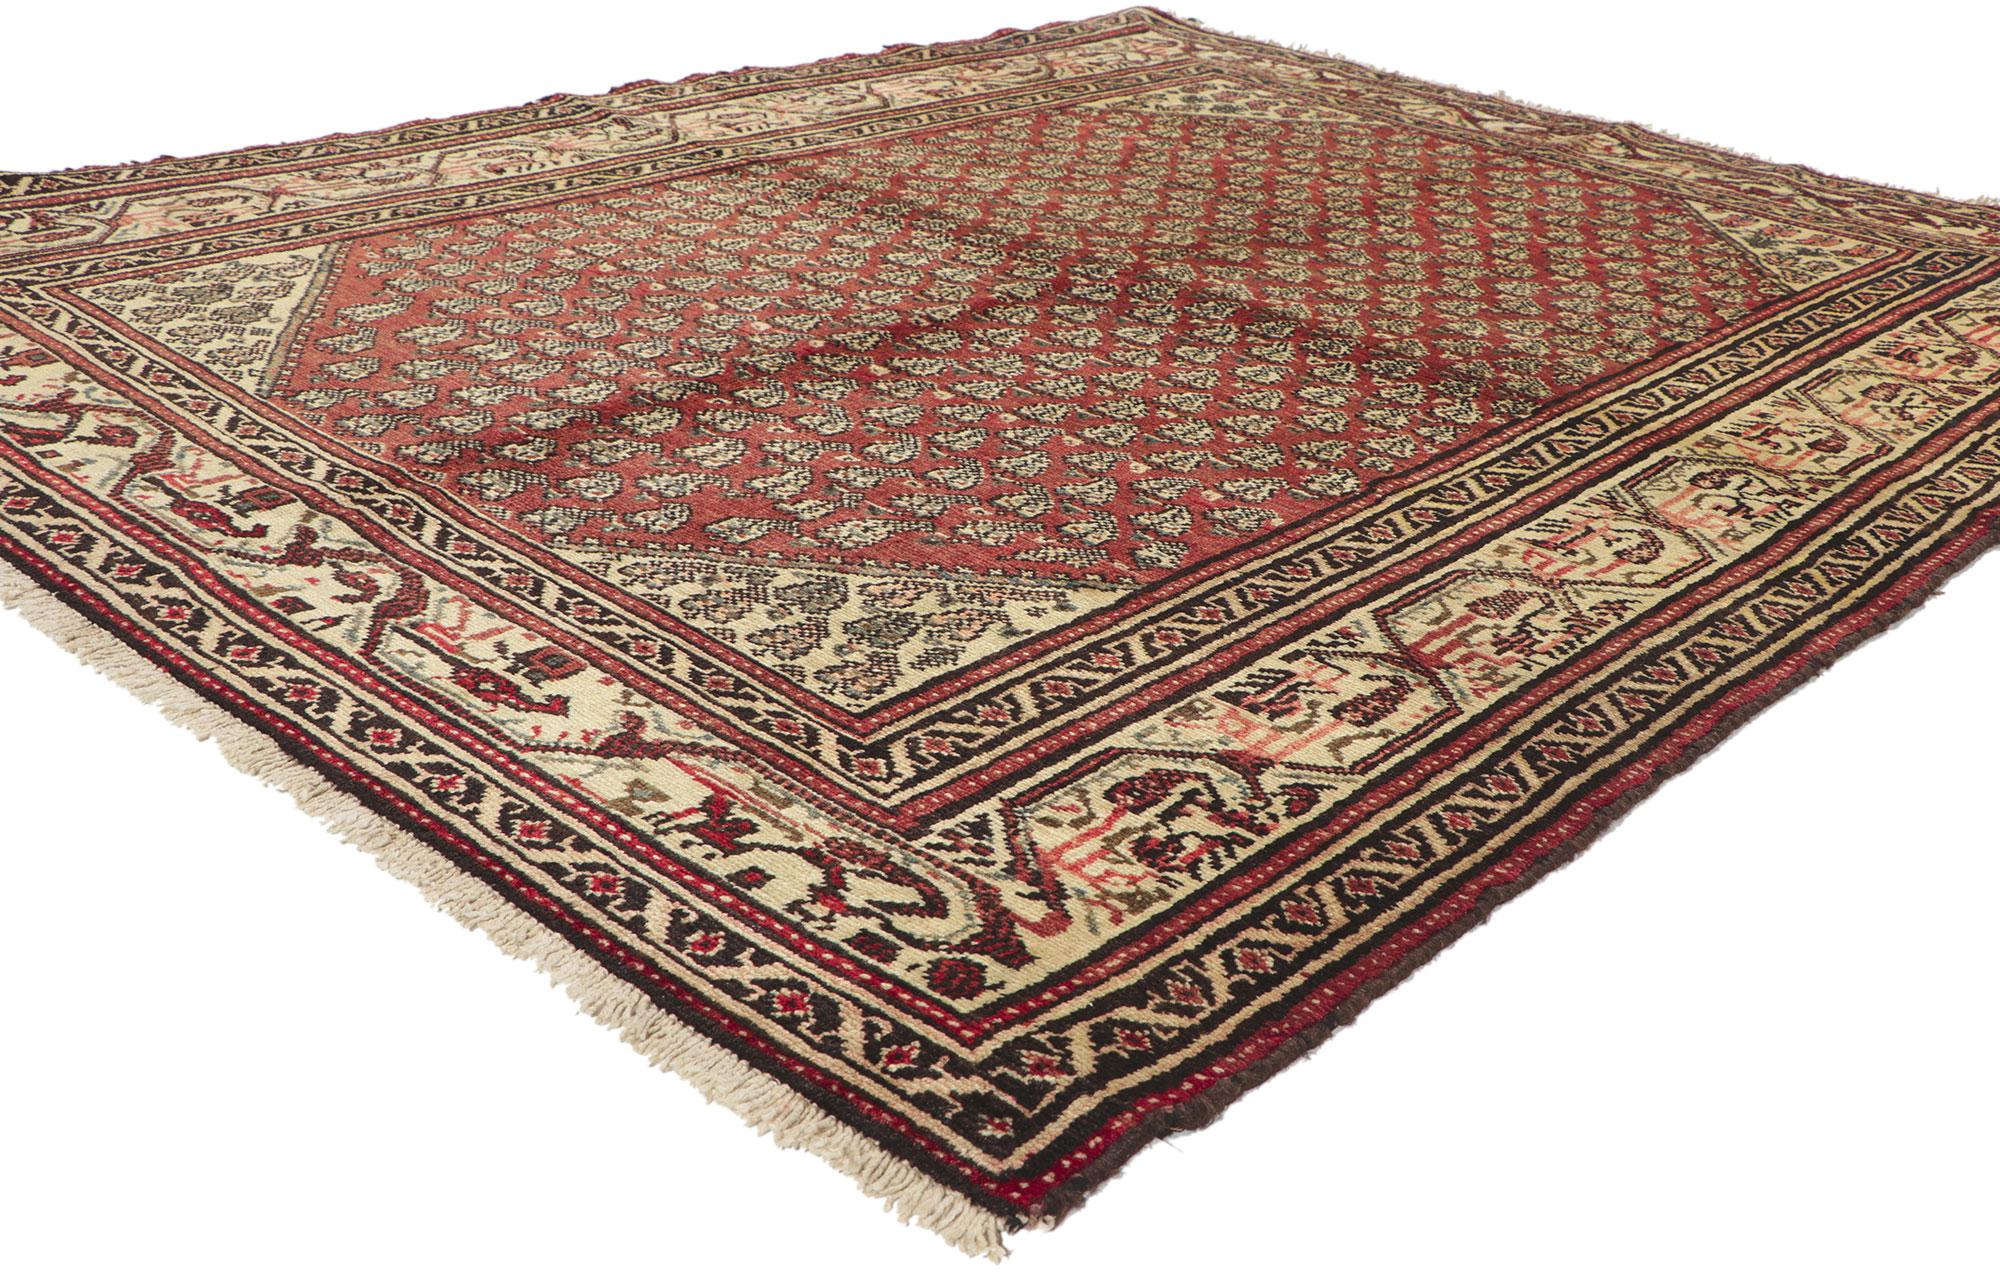 76090 Vintage Persian Hamadan Rug, 05'02 x 06'08.
Rustic yet refined with incredible detail and texture, this hand knotted vintage Persian Hamadan rug is a captivating vision of woven beauty. The small-scale allover pattern and earthy colorway